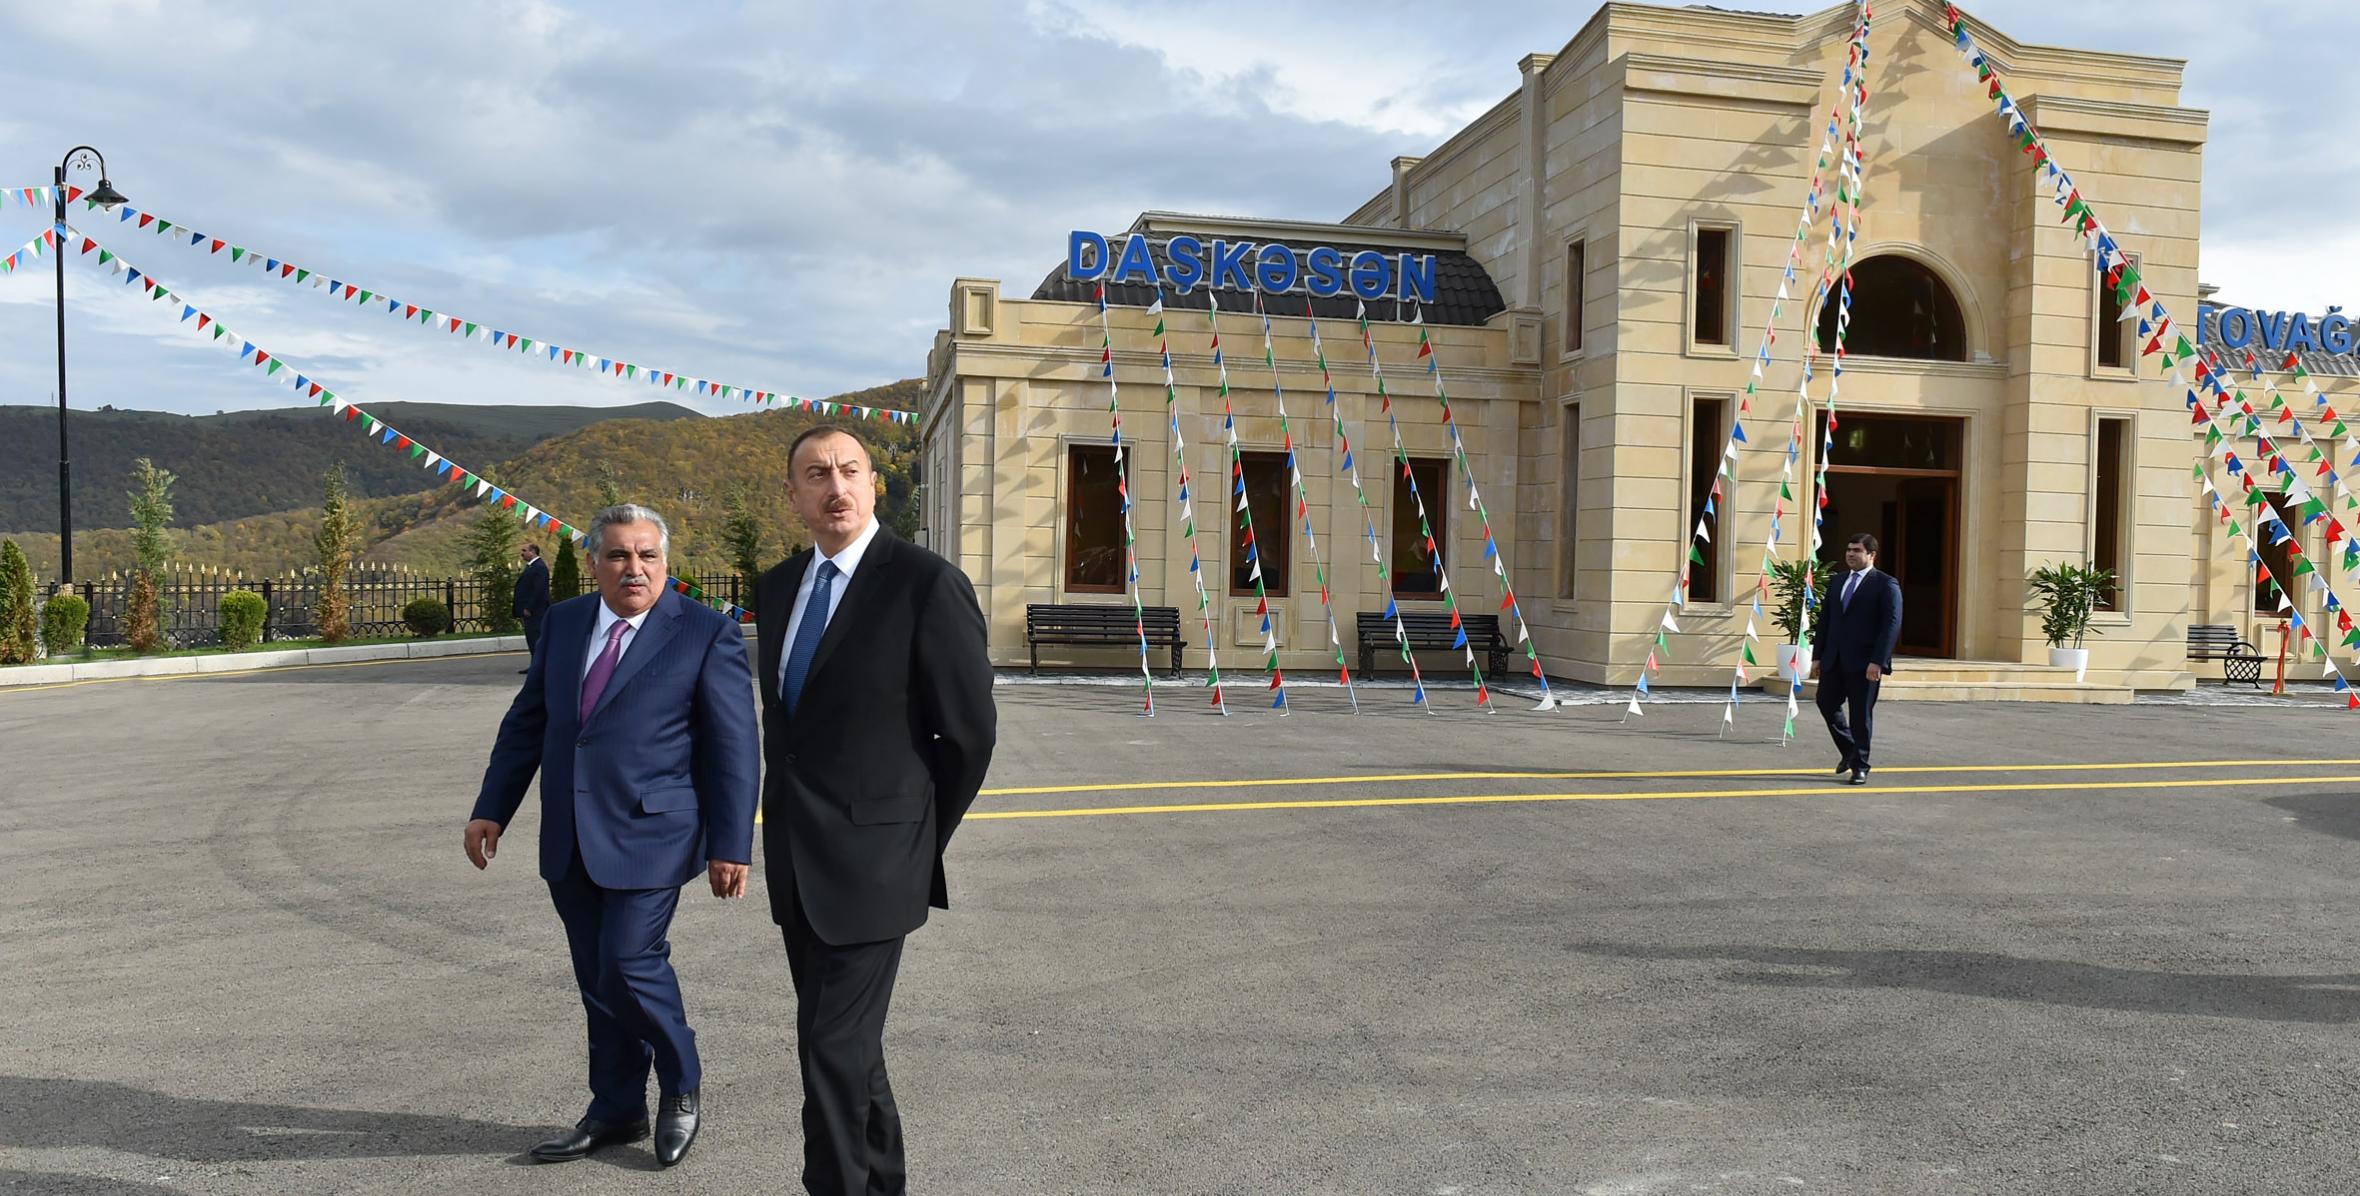 Ilham Aliyev attended the opening of a new bus station in Dashkasan